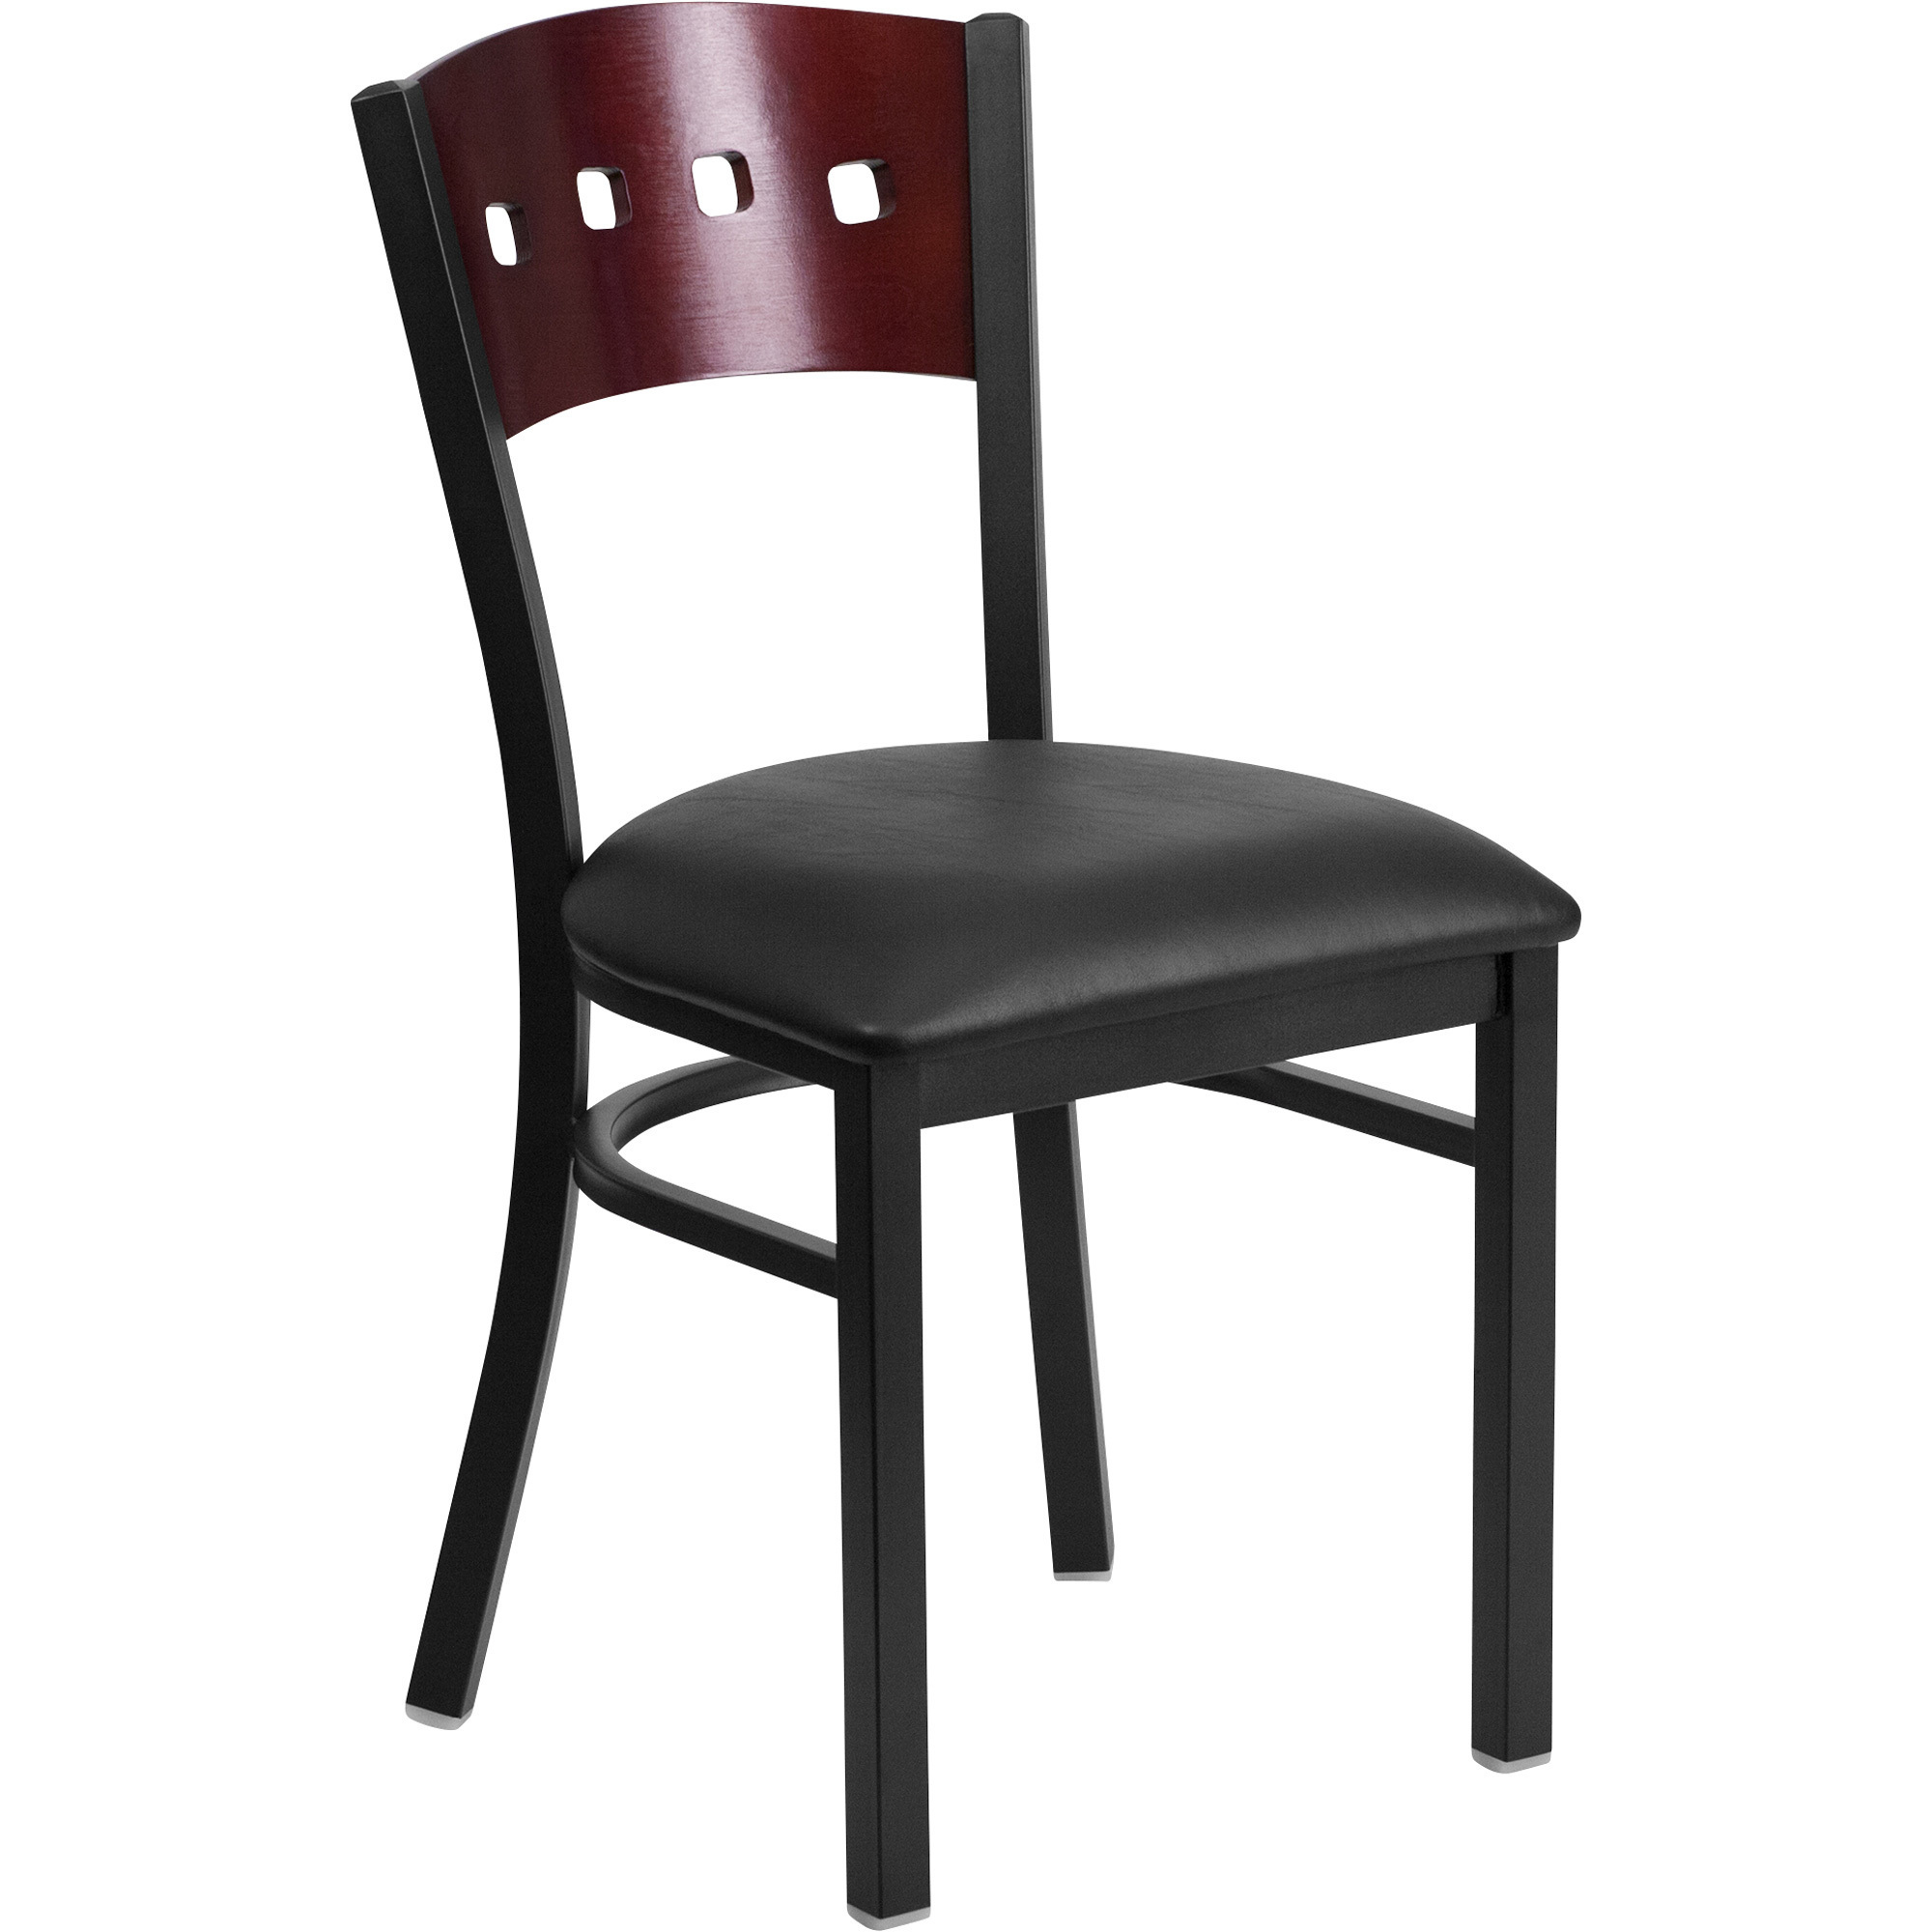 Flash Furniture Black Metal Restaurant Chair with 4 Square Back â Mahogany Wood Back/Black Vinyl Seat, Model XUDG6Y1BMAHBKV